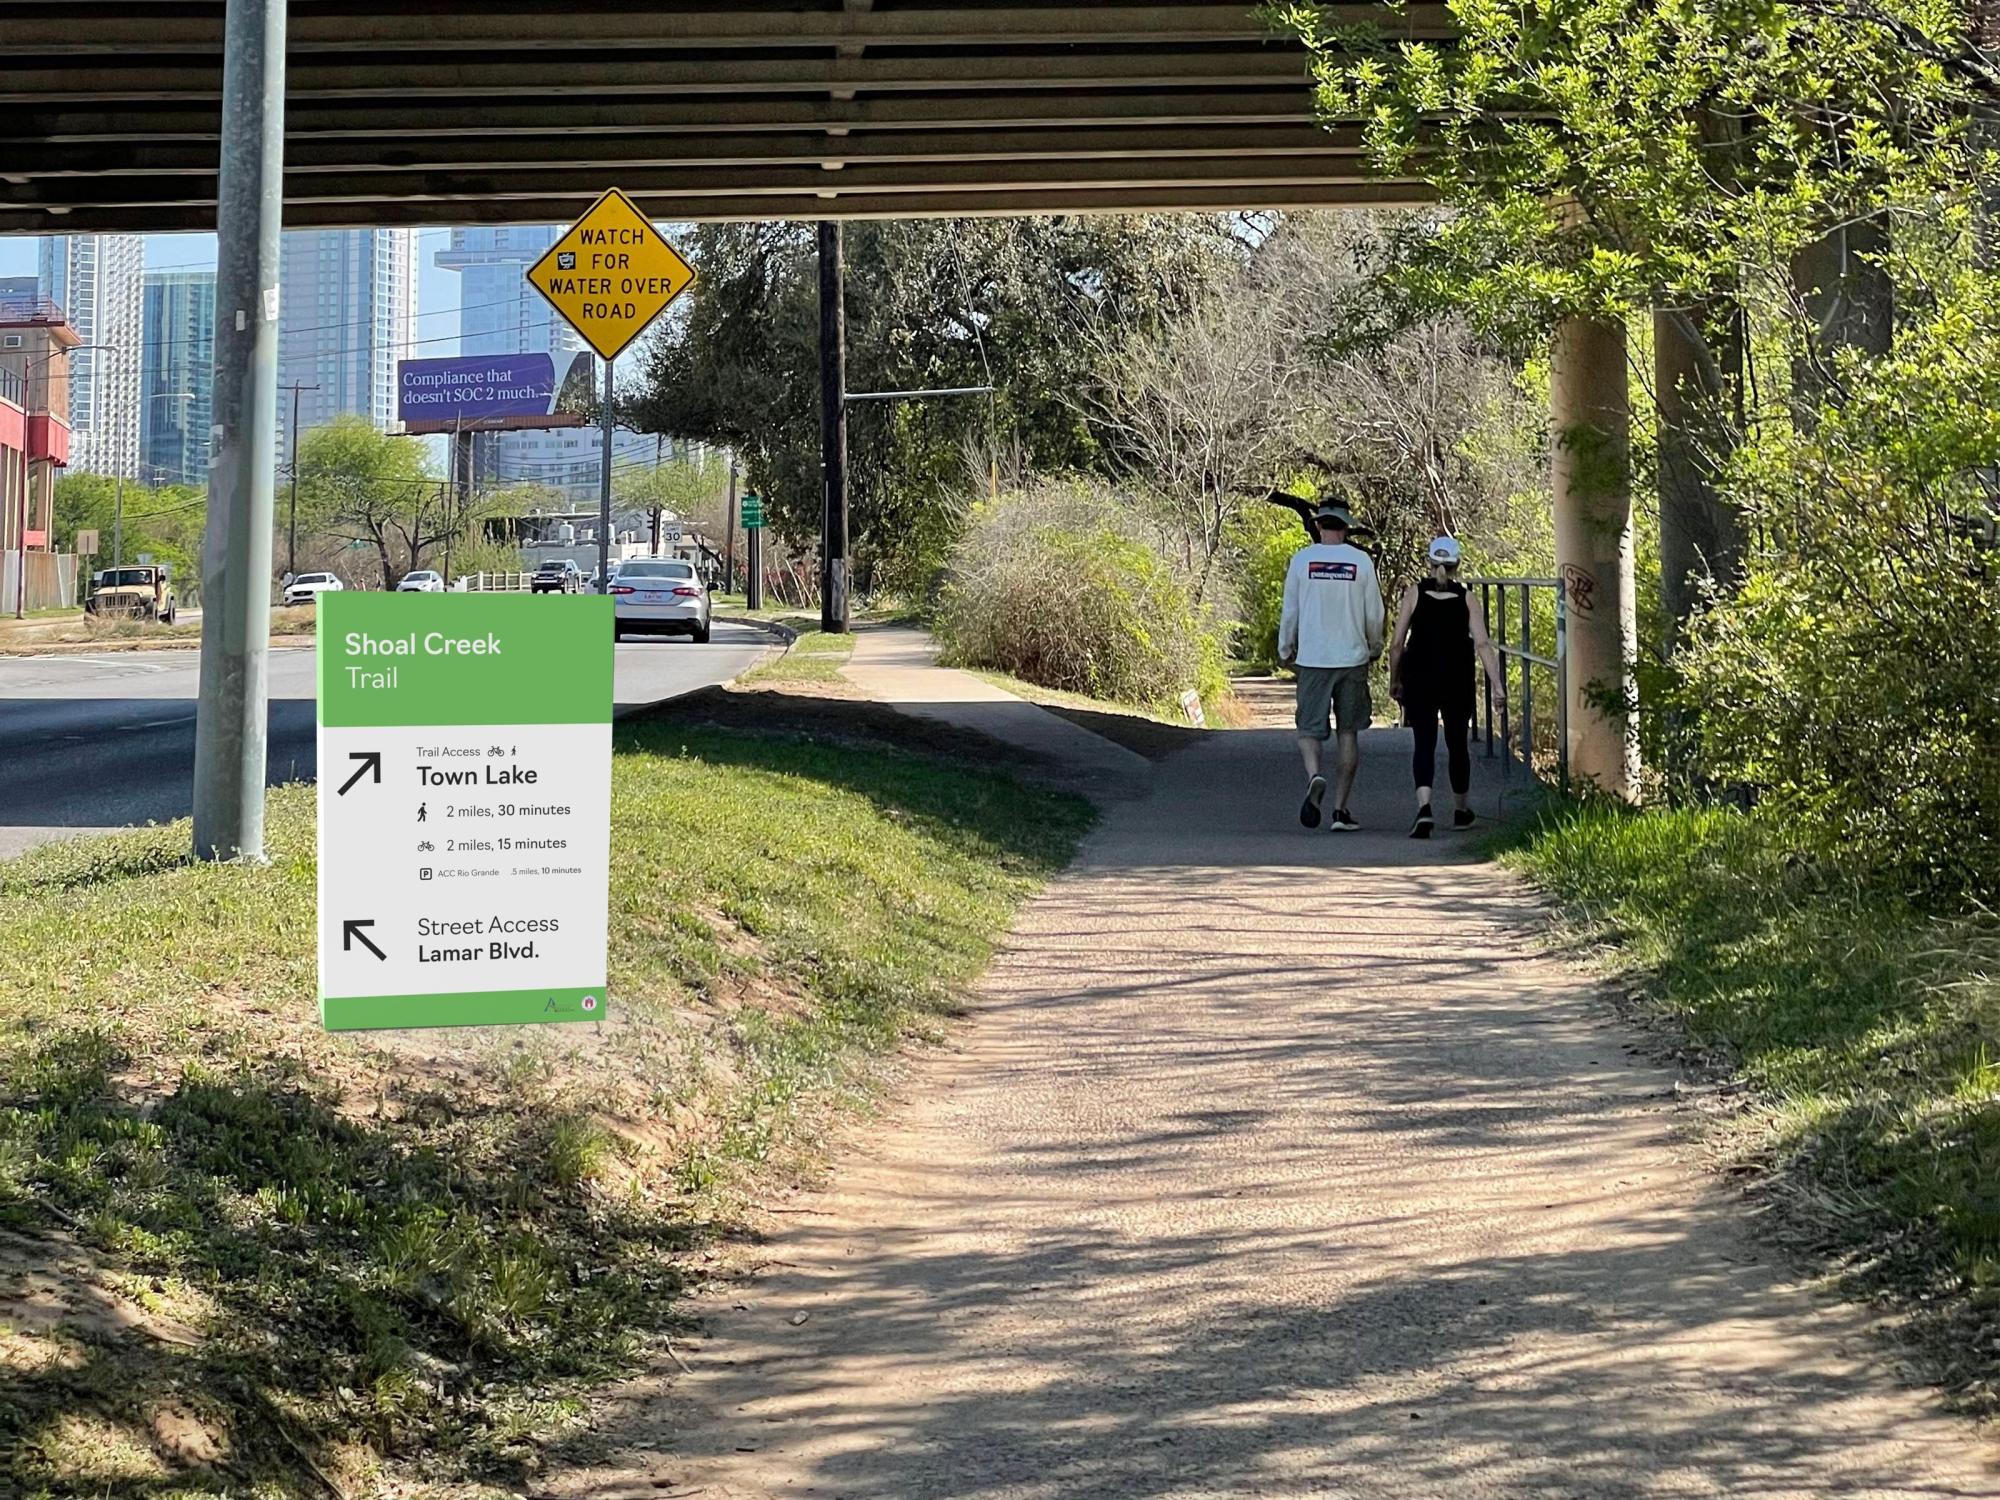 Park trail with couple walking in the background and a trail sign mockup in the foreground